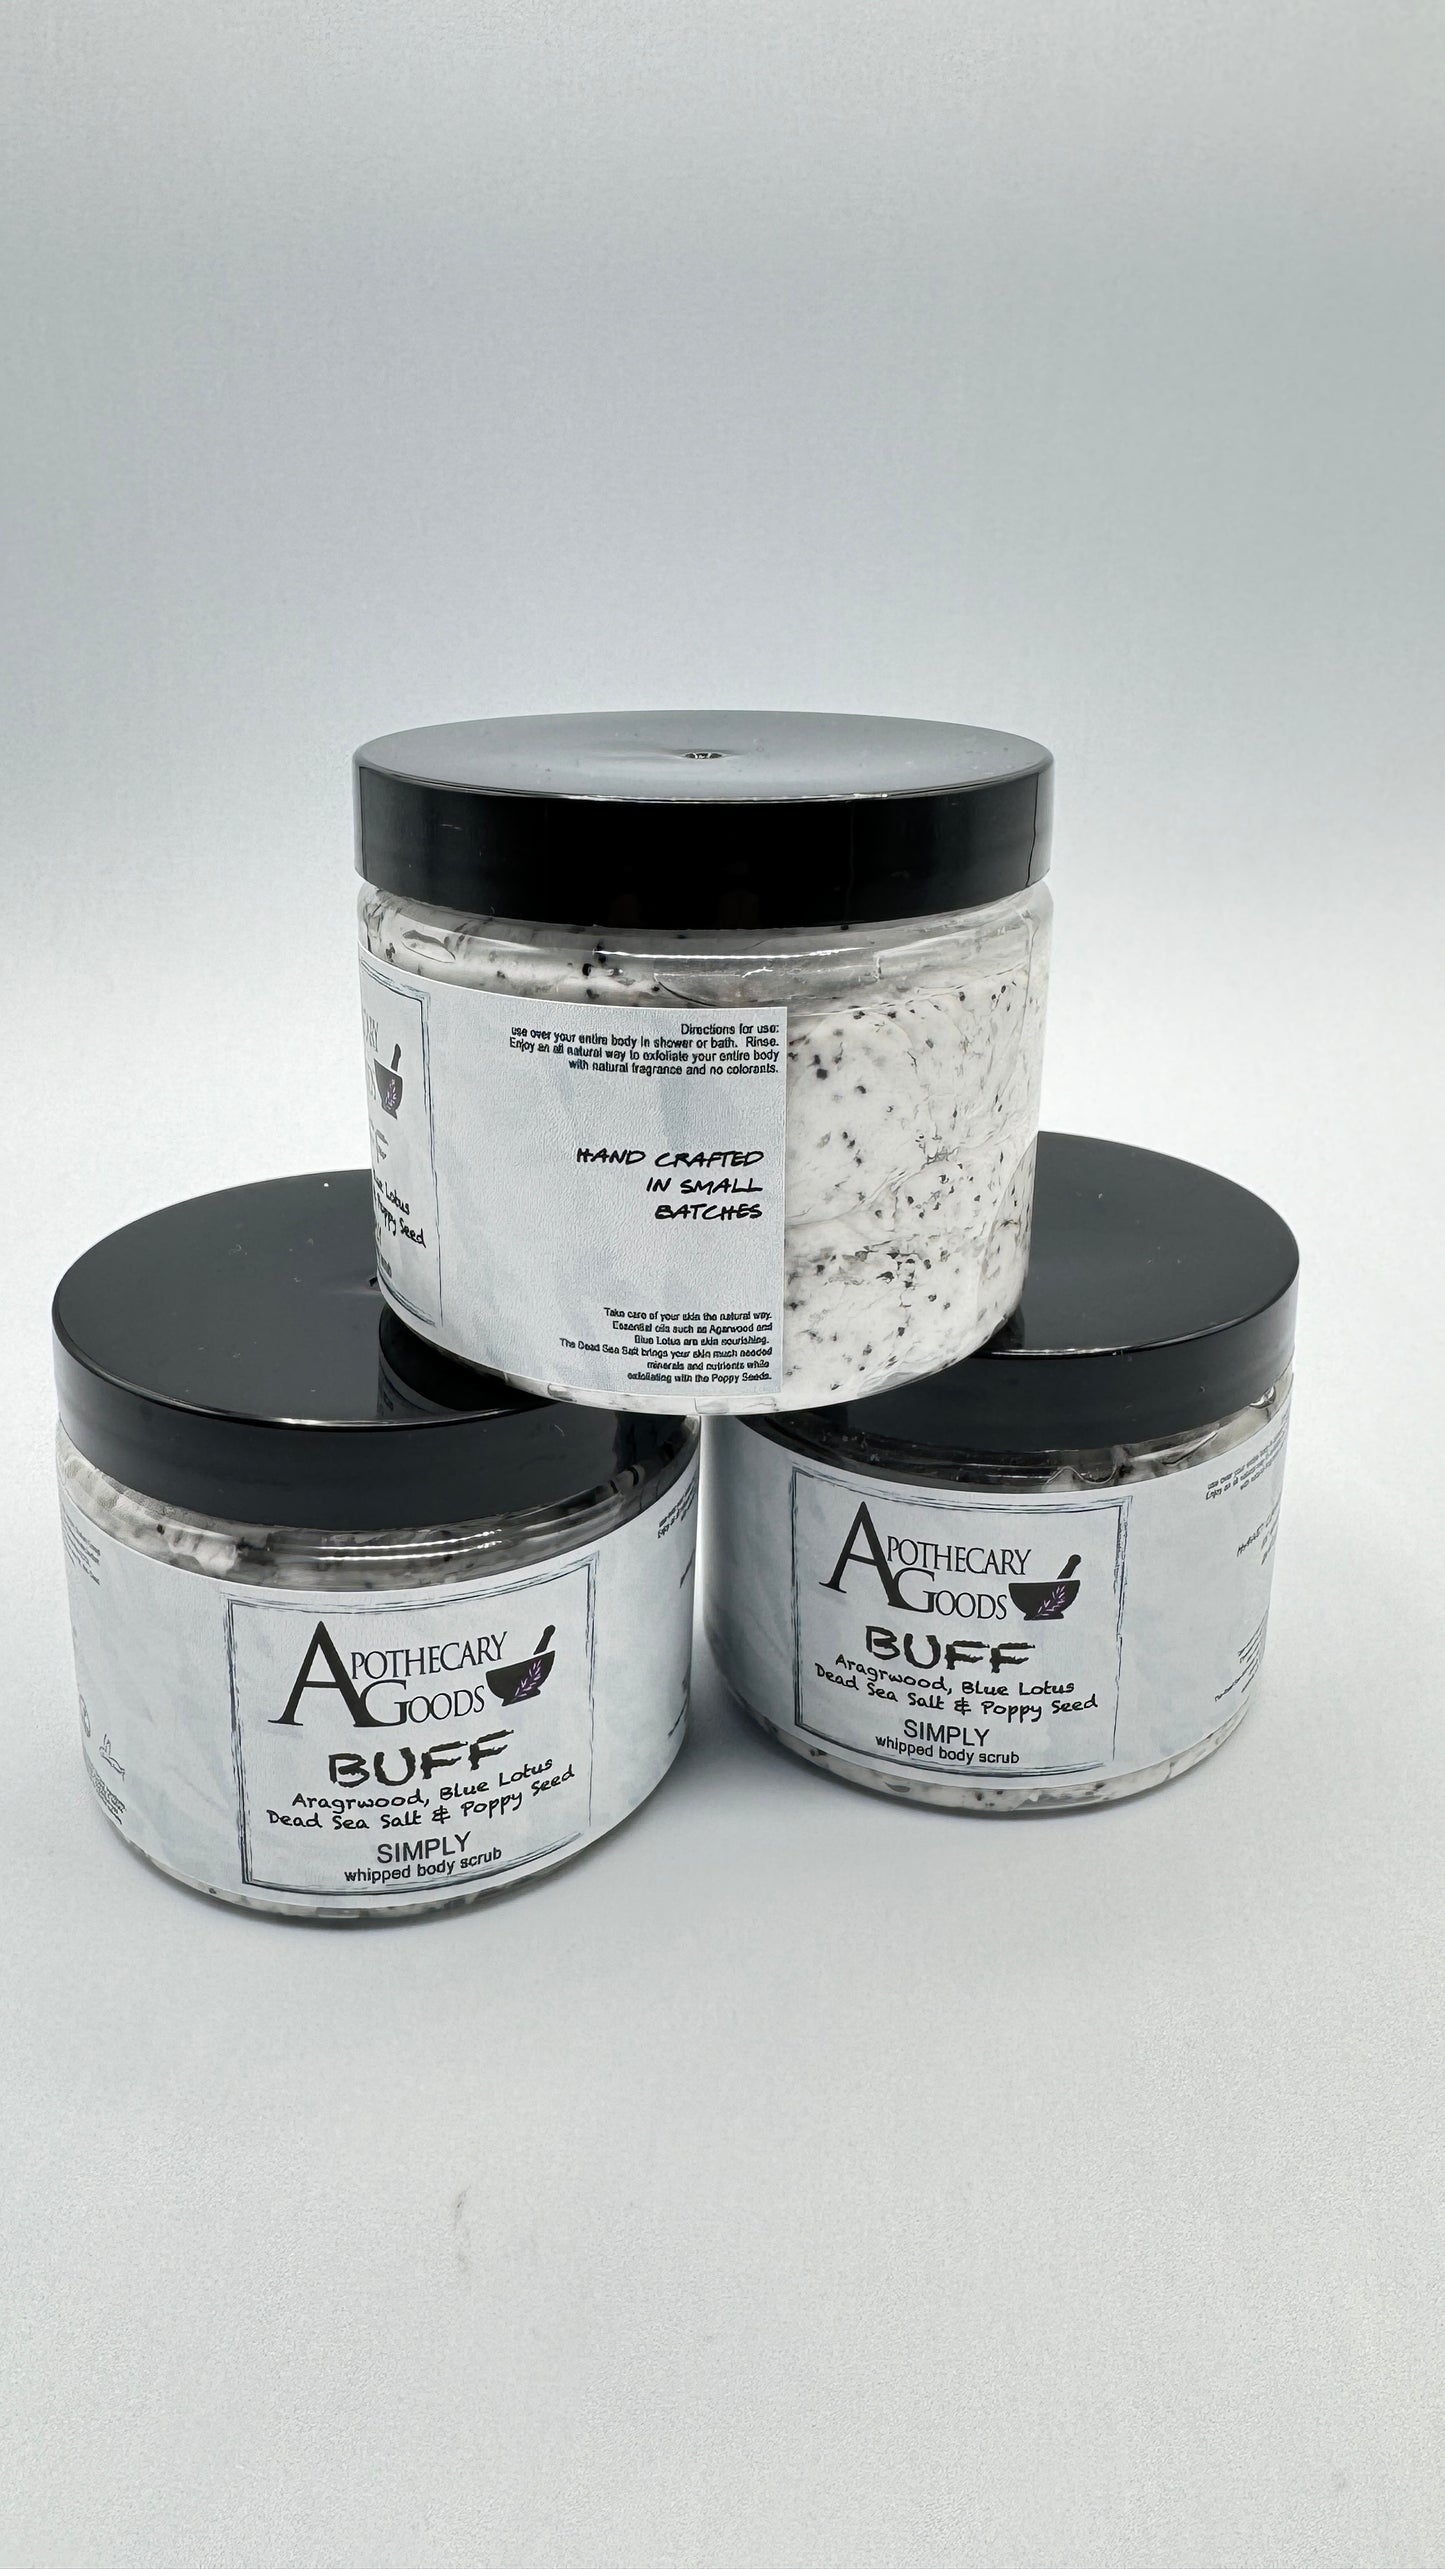 Apothecary Goods | SIMPLY | BUFF Whipped Dead Sea Salt and Poppy Seed Body Scrub | Magnesium Rich | Smooth your body | Anti Aging